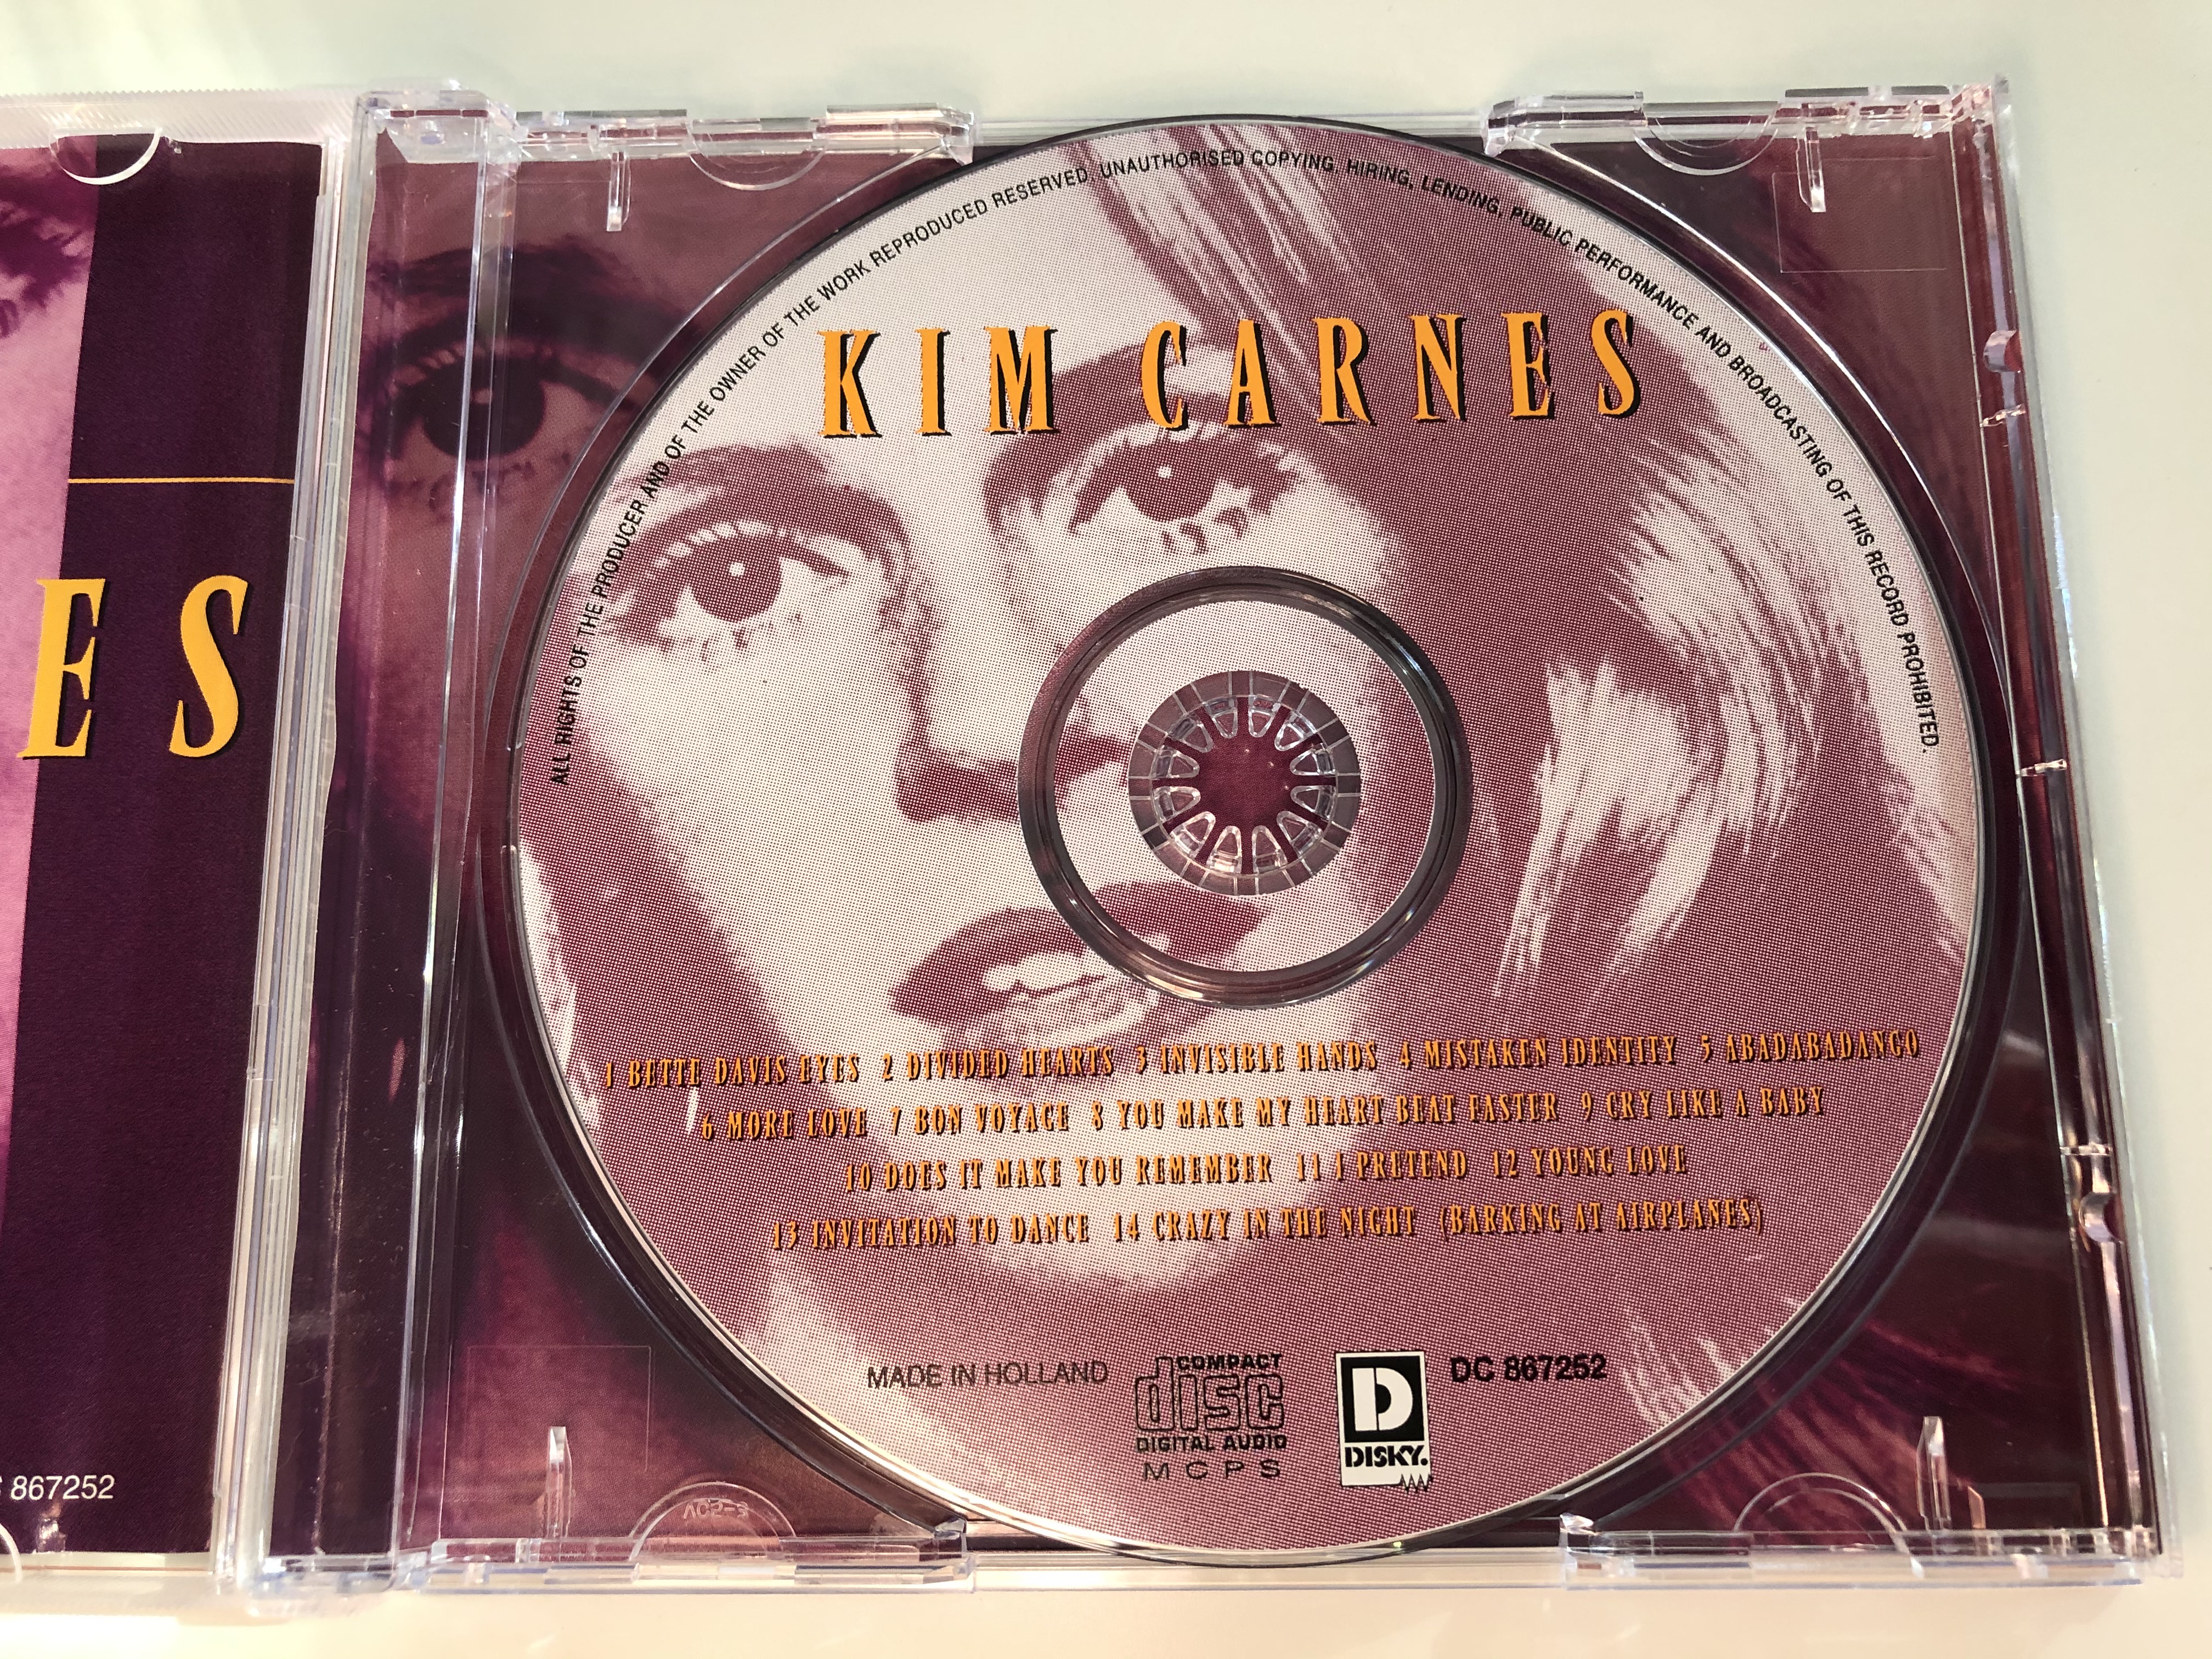 bette-davis-eyes-kim-carnes-invisible-hands-mistaken-identity-does-it-make-you-remember-cry-like-a-baby-disky-audio-cd-1996-dc-867252-3-.jpg